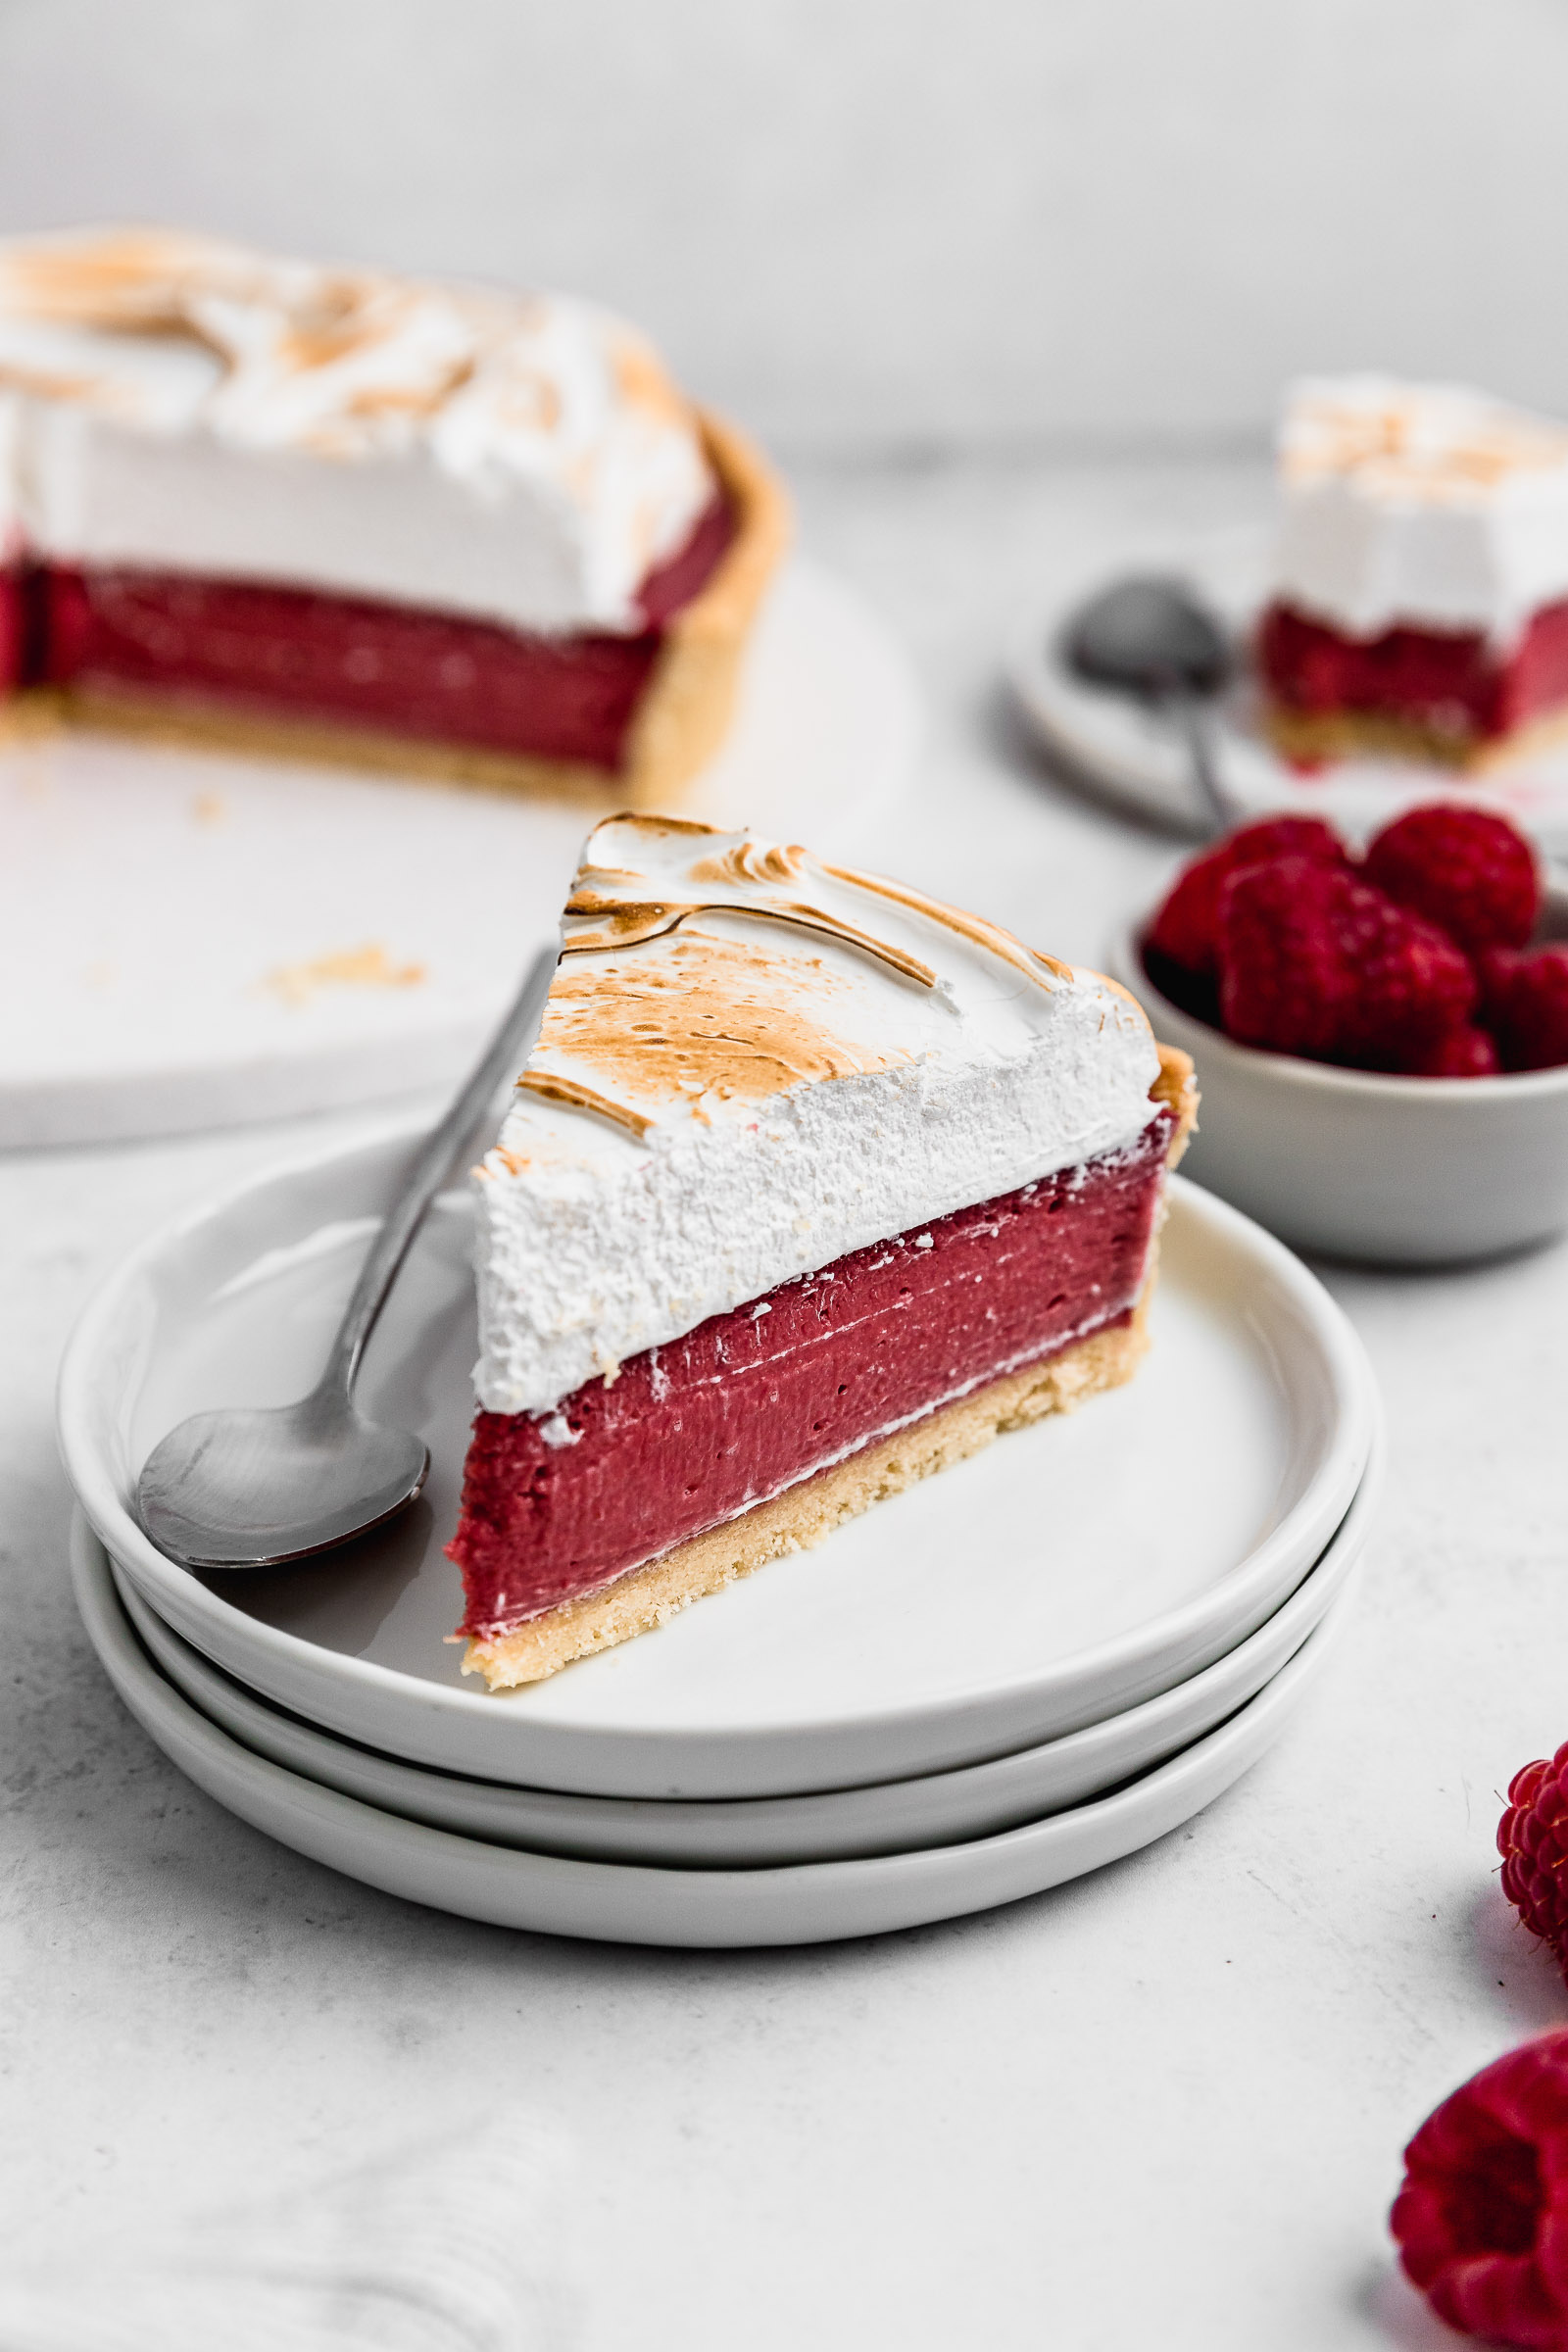 Slice of Raspberry Meringue Pie Recipe with Swiss Meringue. The layers are very evident with a golden crust, a bright red raspberry filling and a white Swiss Meringue on top that has been blow-torched.